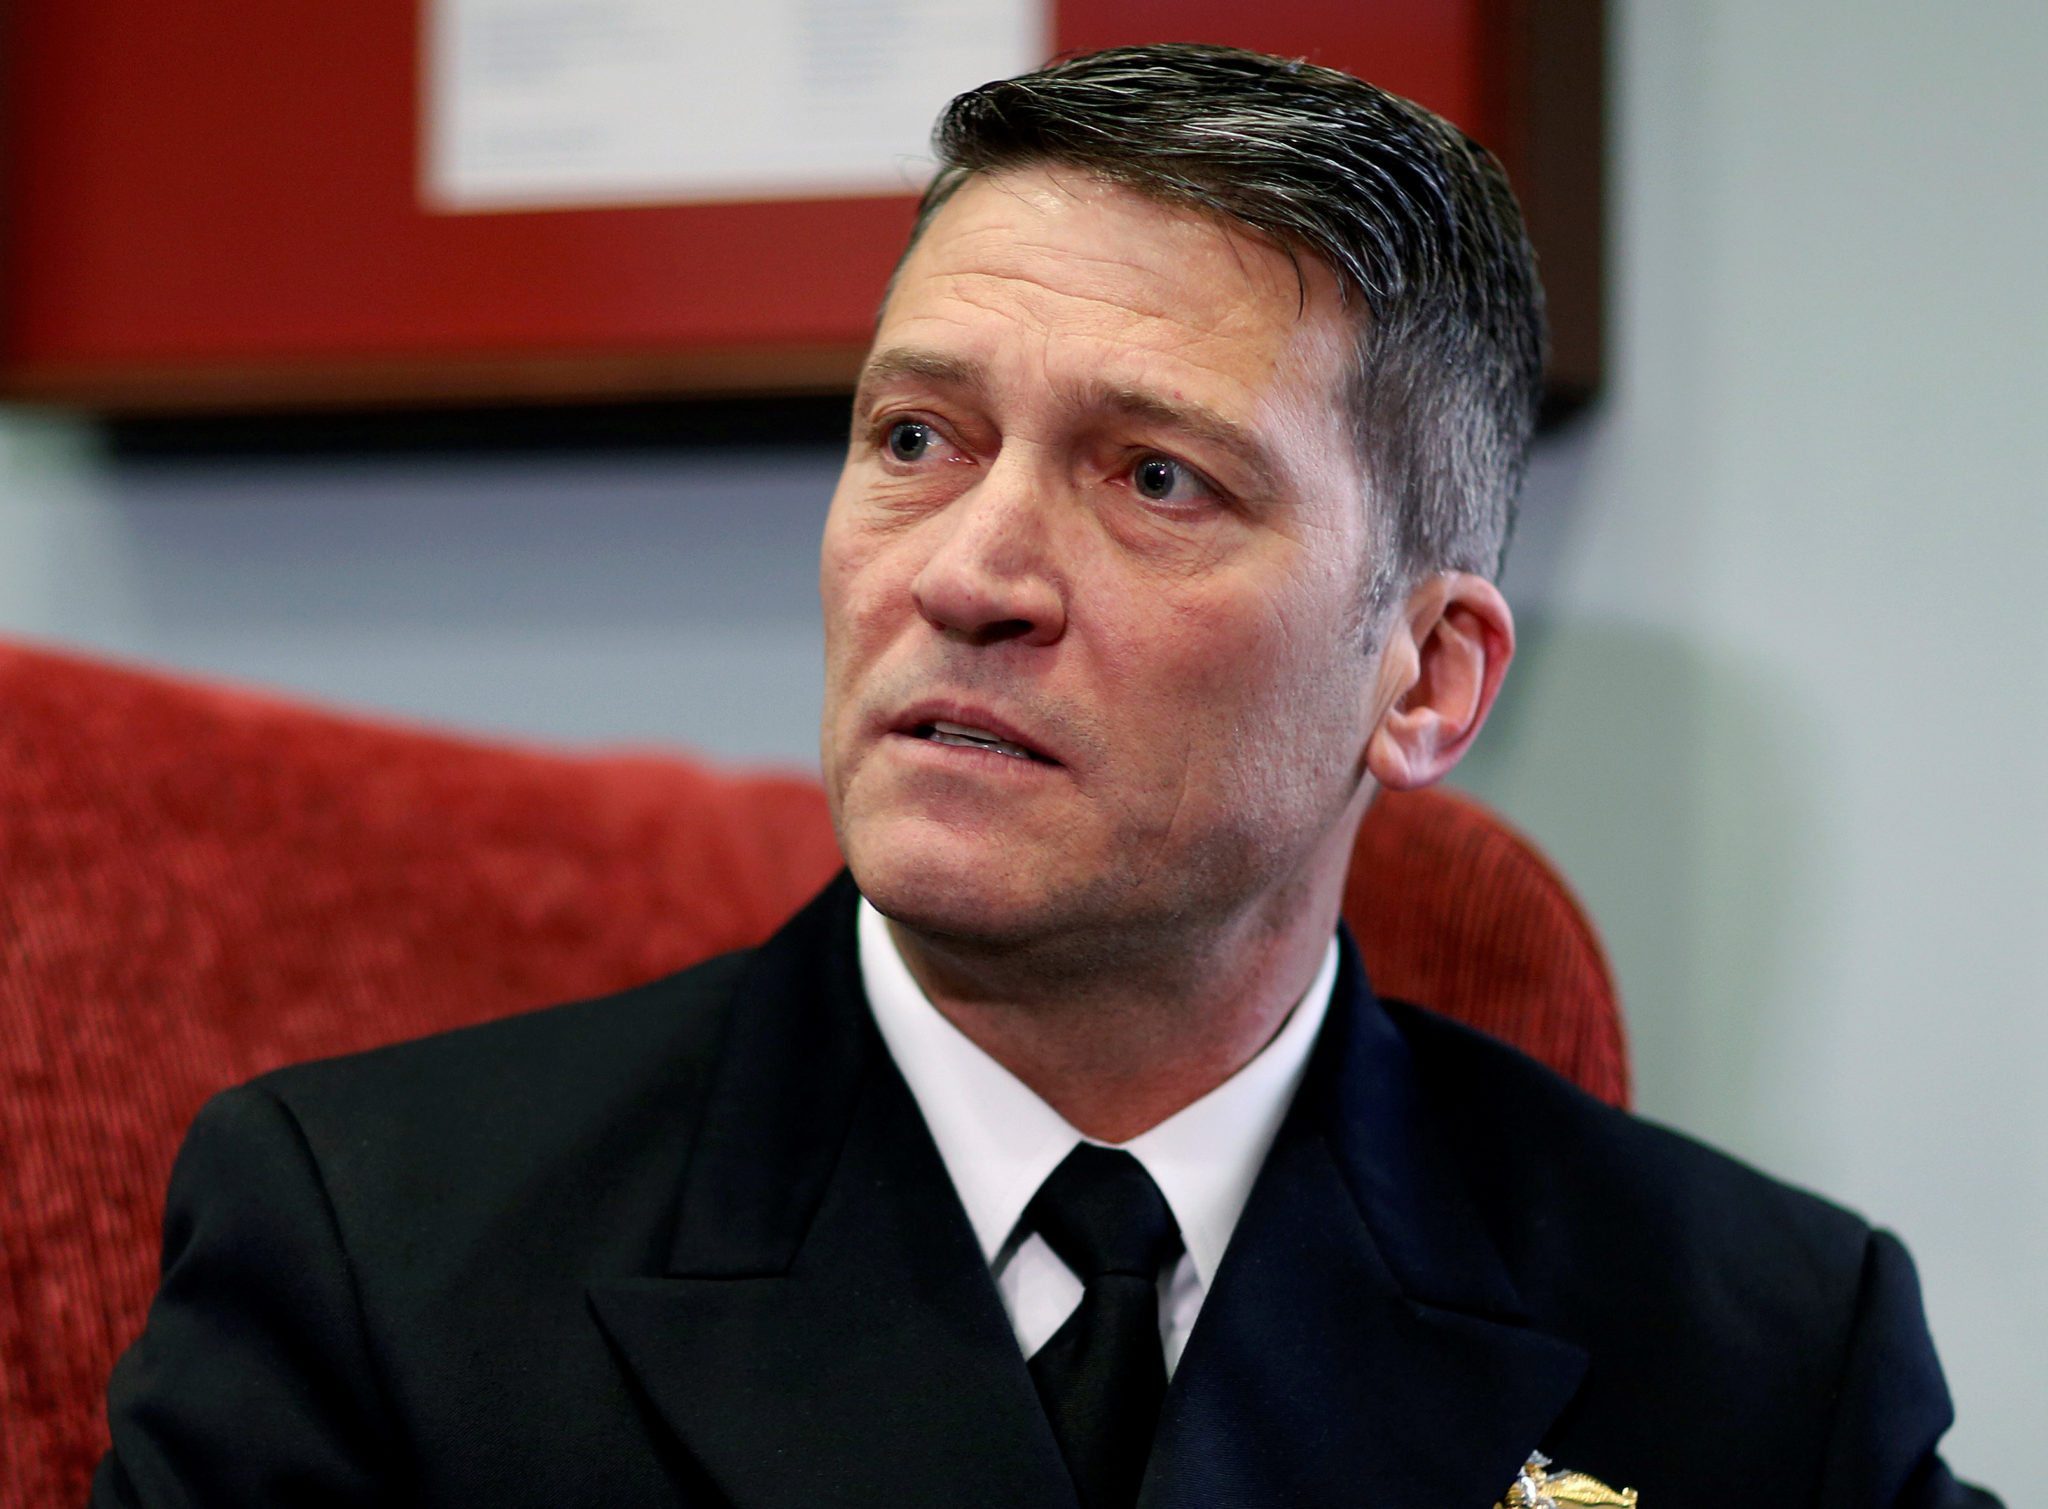 Rep. Ronny Jackson Has A Suspicious Meltdown As 1/6 Committee Focuses On Oath Keepers